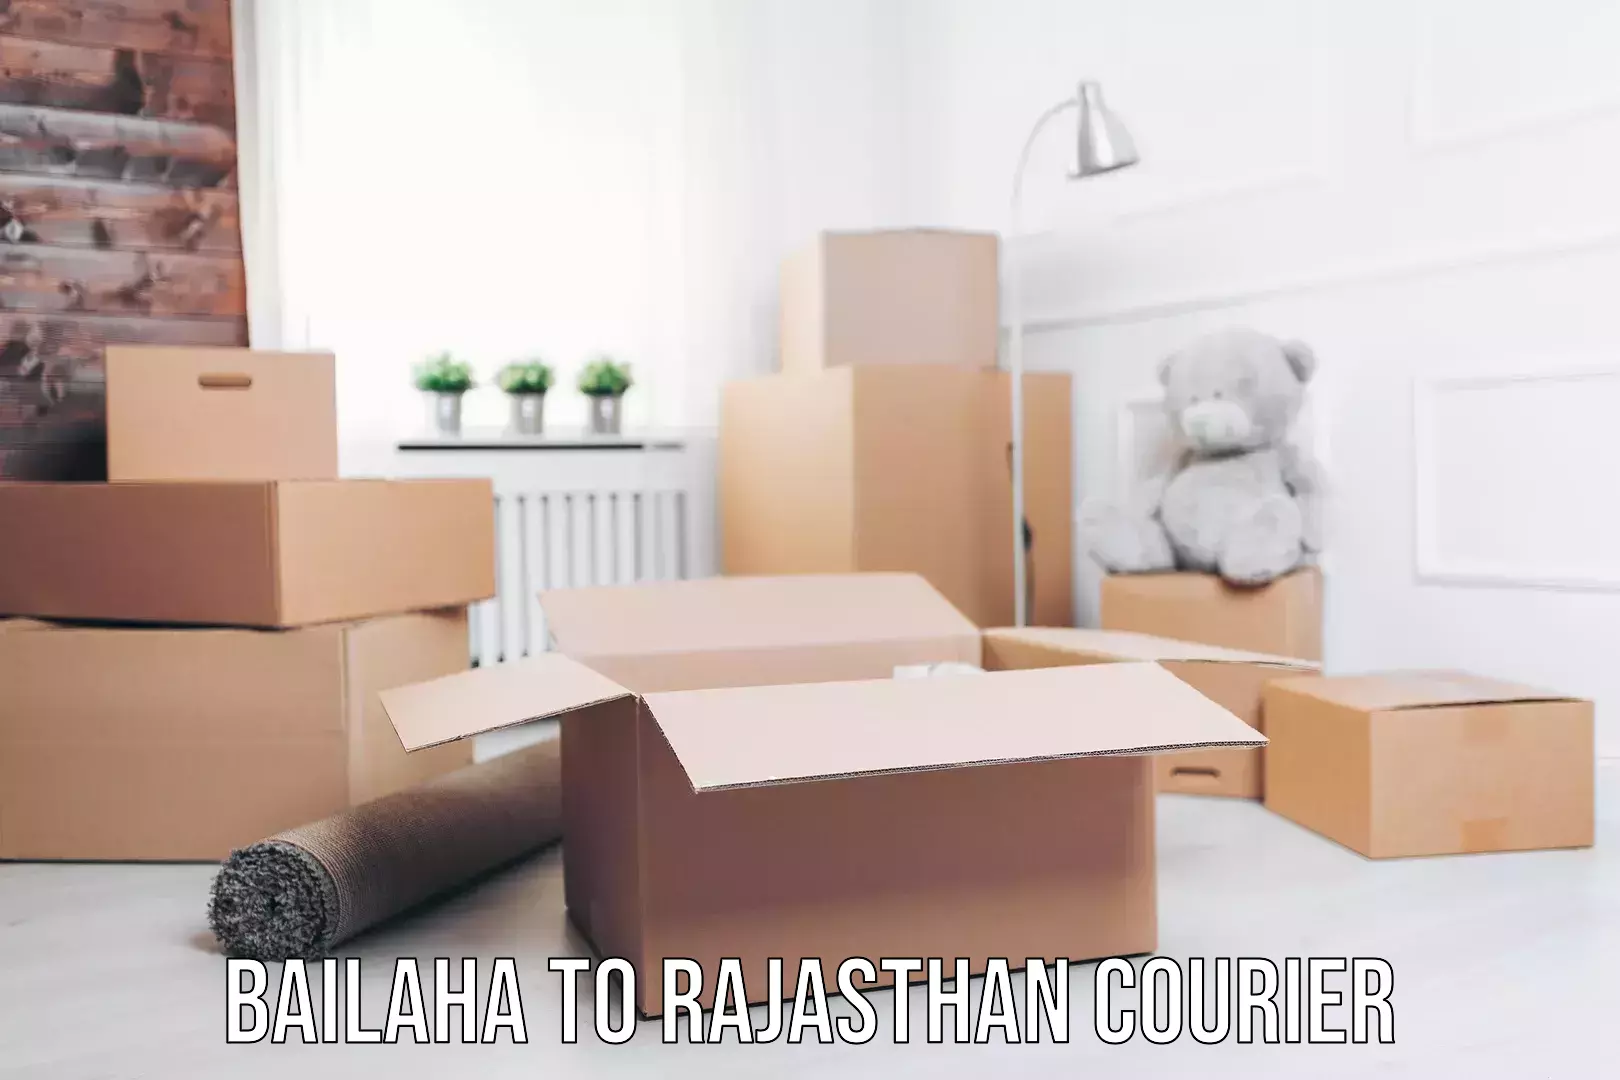 Global courier networks Bailaha to Rajasthan